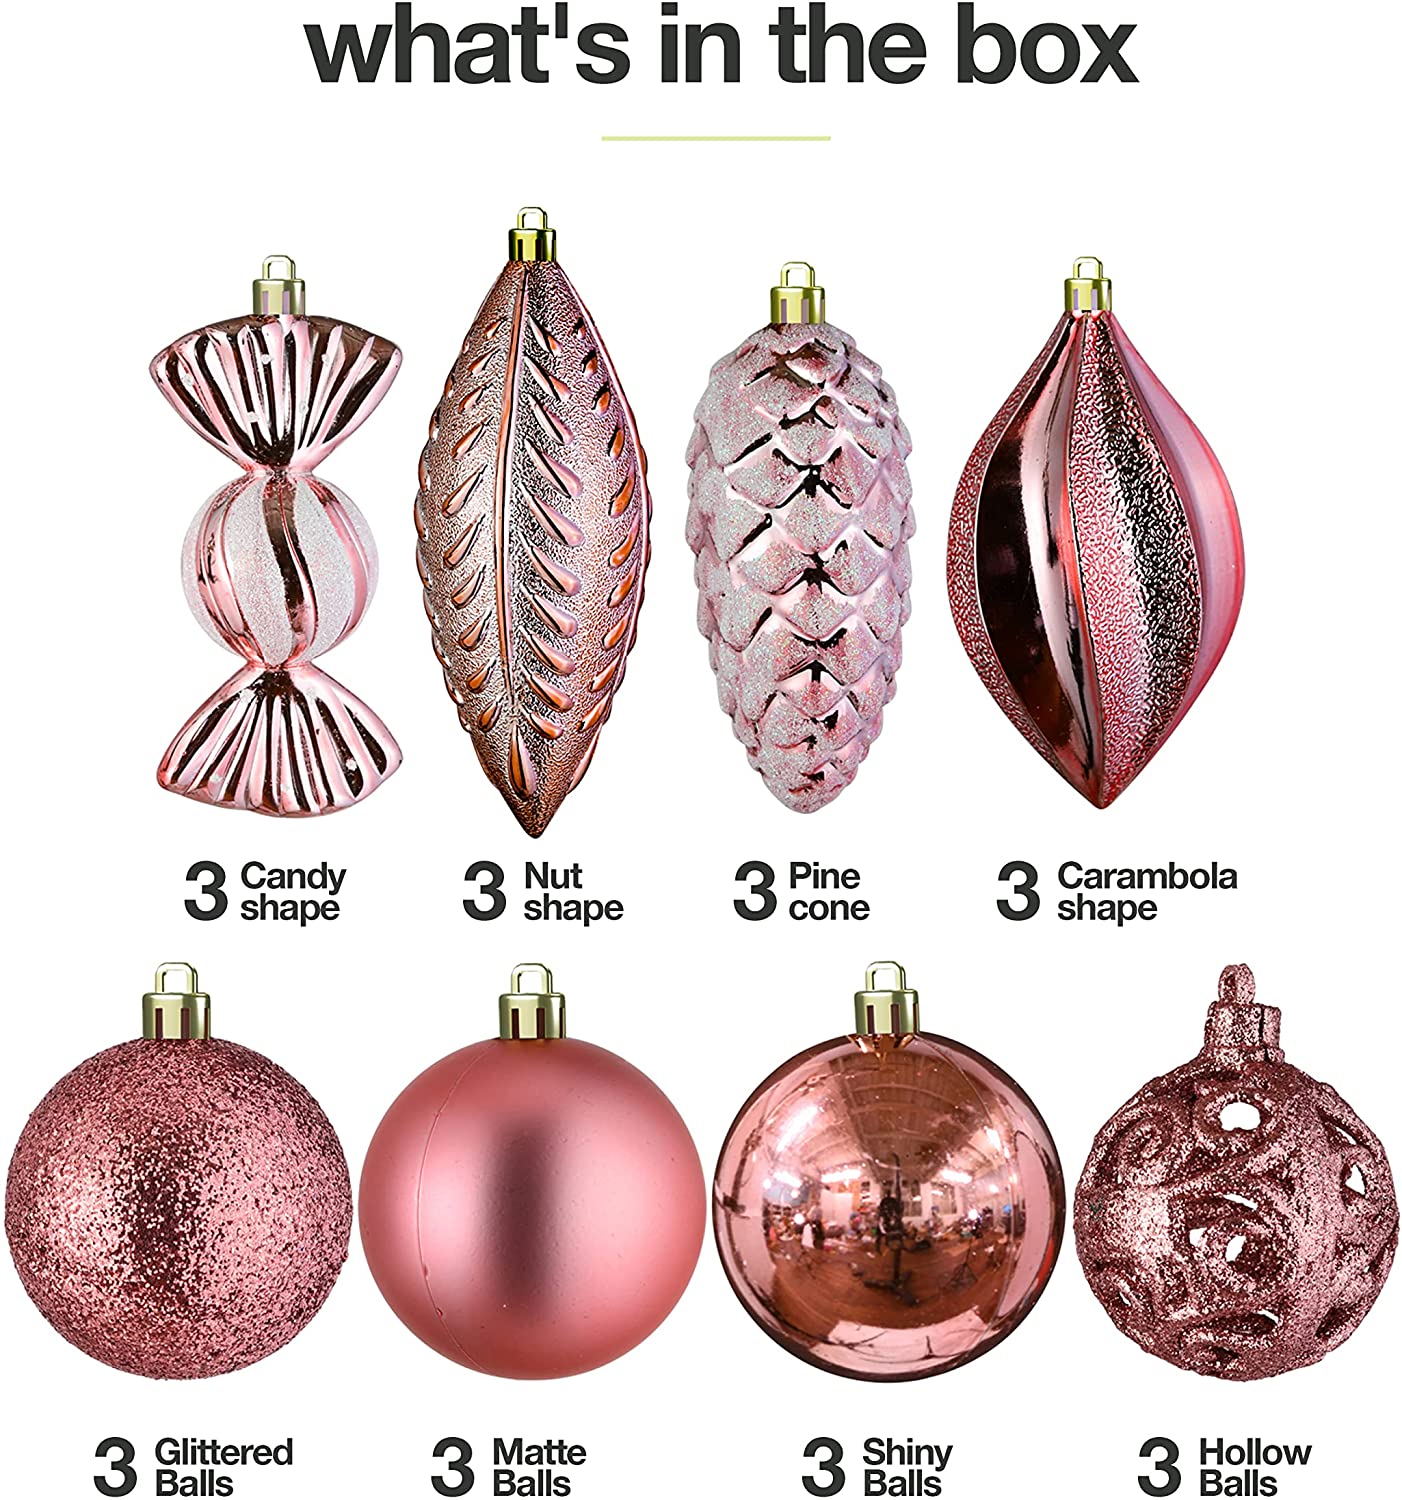 Rose Gold Christmas Ball Ornaments for Christmas Decorations - 24 Pieces Xmas Tree Shatterproof Ornaments with Hanging Loop for Holiday and Party Decoration (Combo of 8 Ball and Shaped Styles) - image 2 of 7